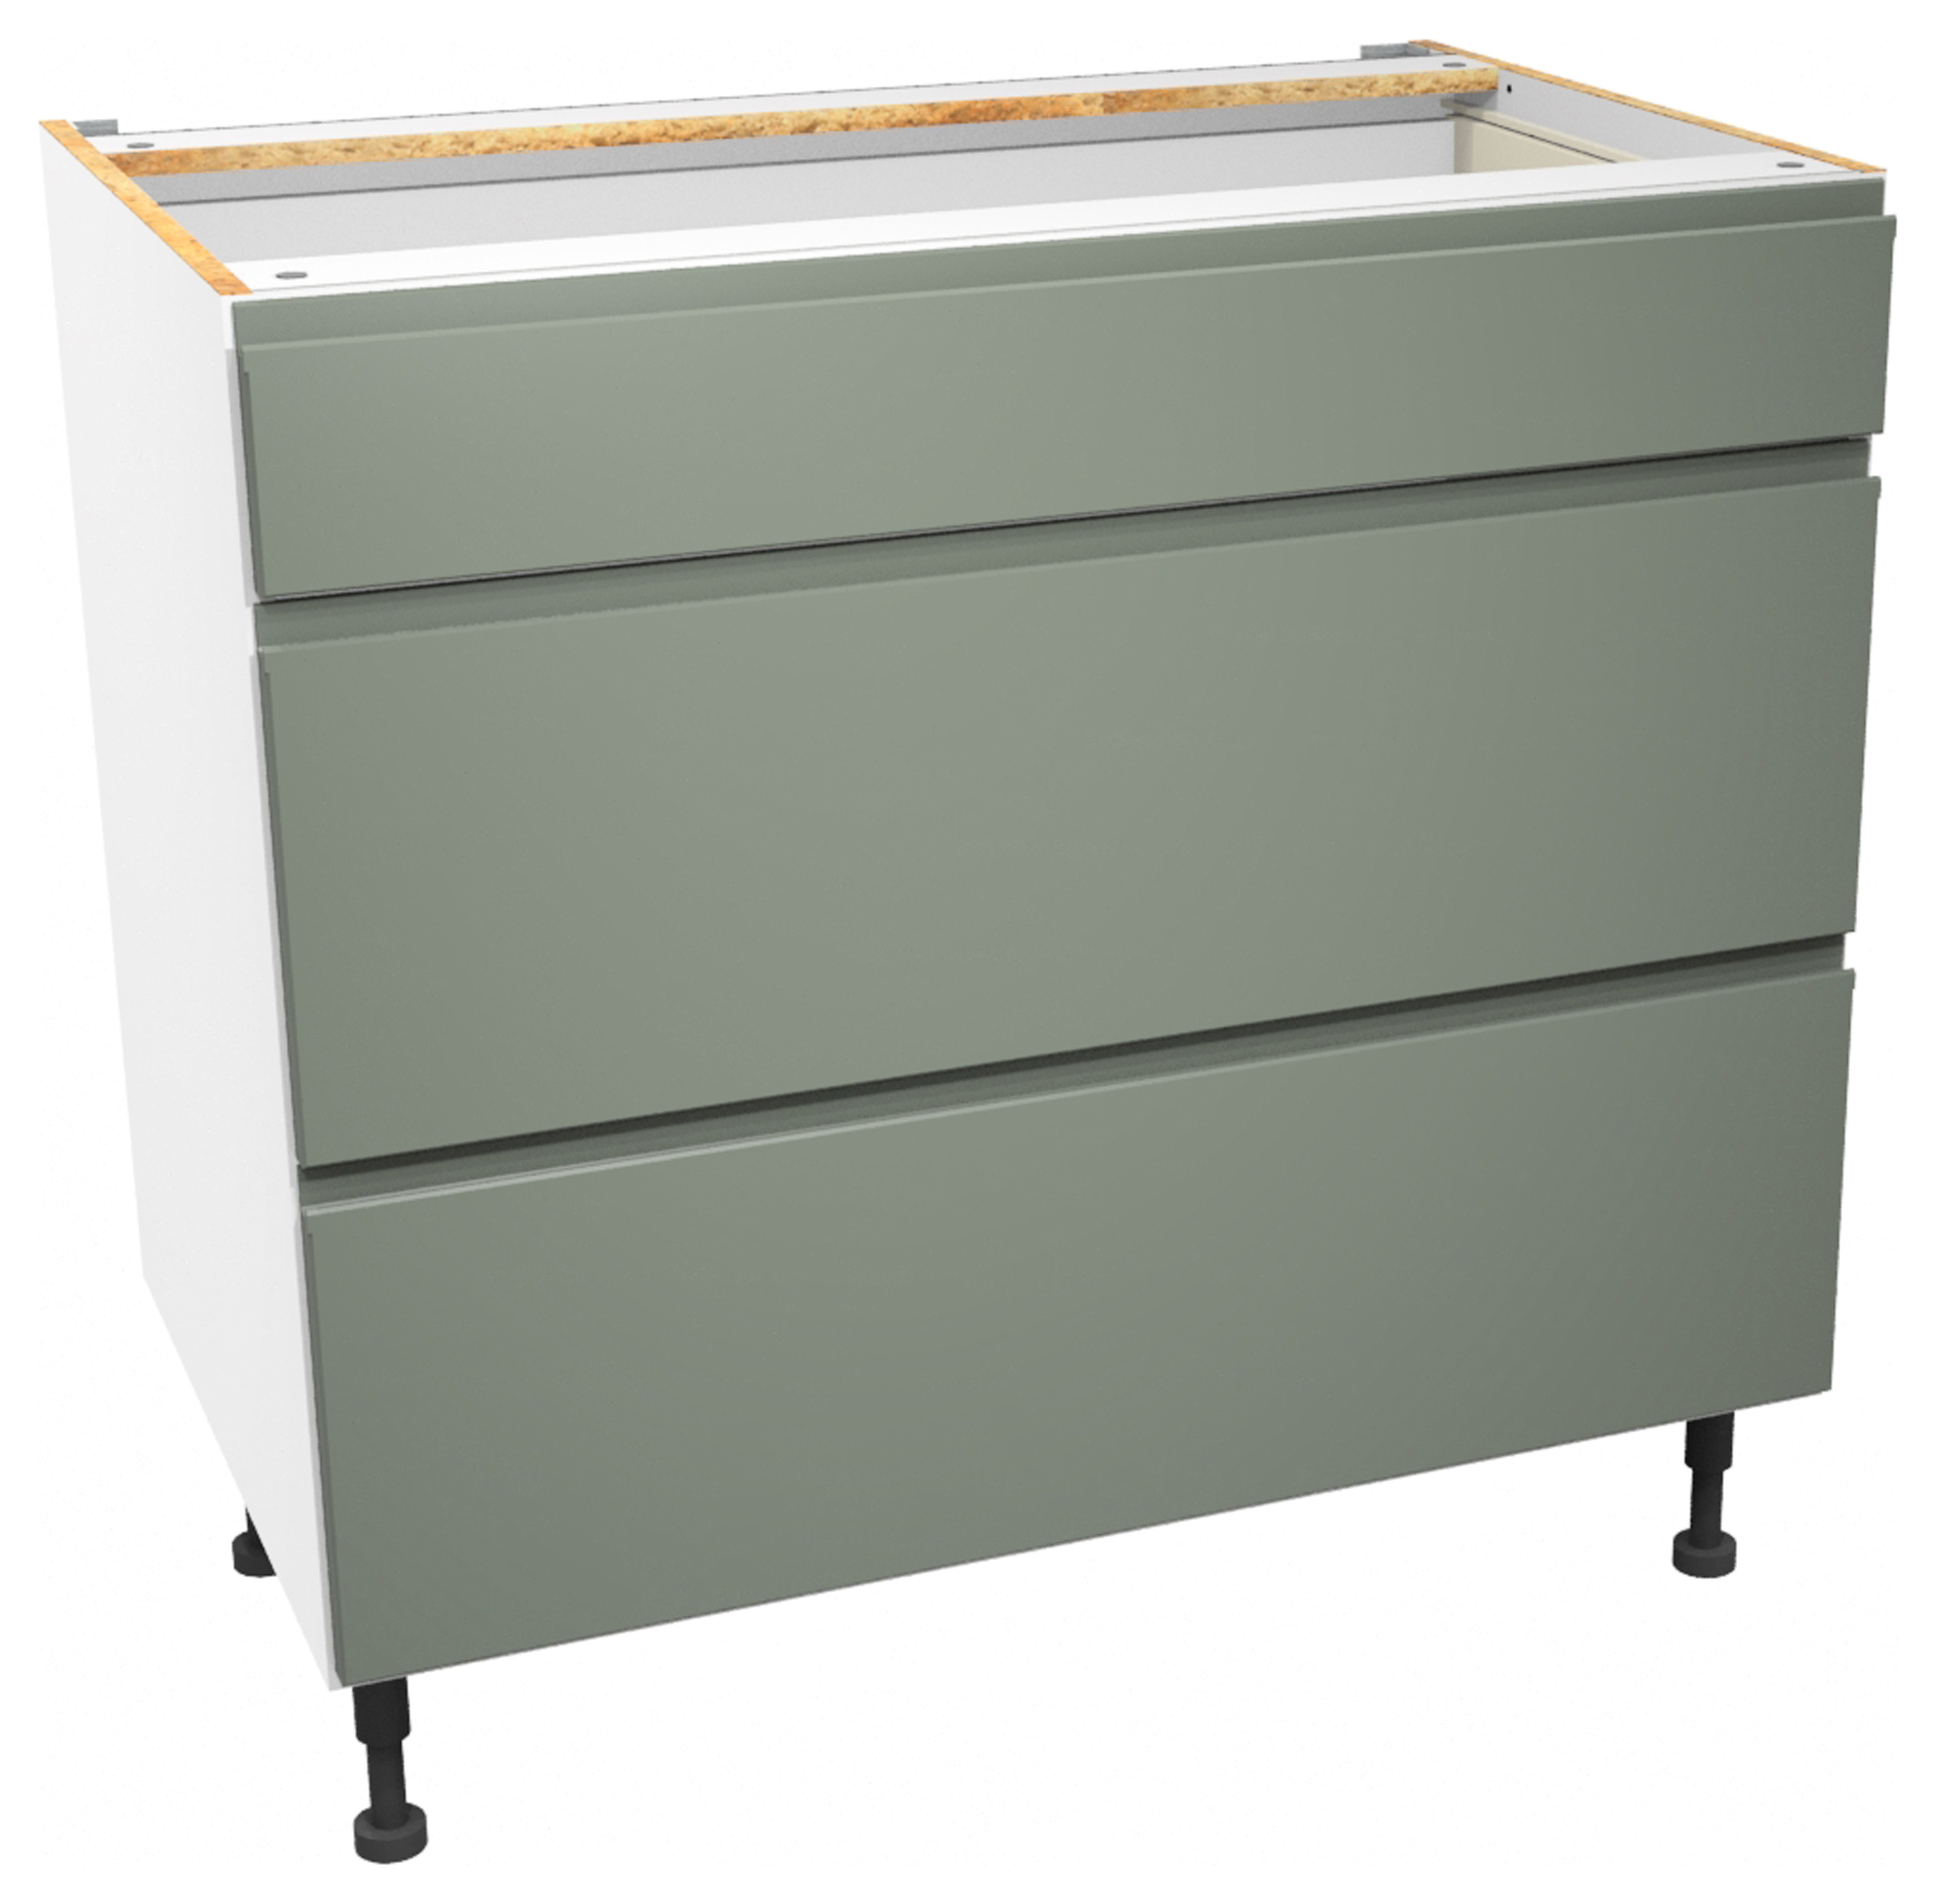 Image of Wickes Madison Reed Green Drawer Unit - 900mm (Part 1 of 2)